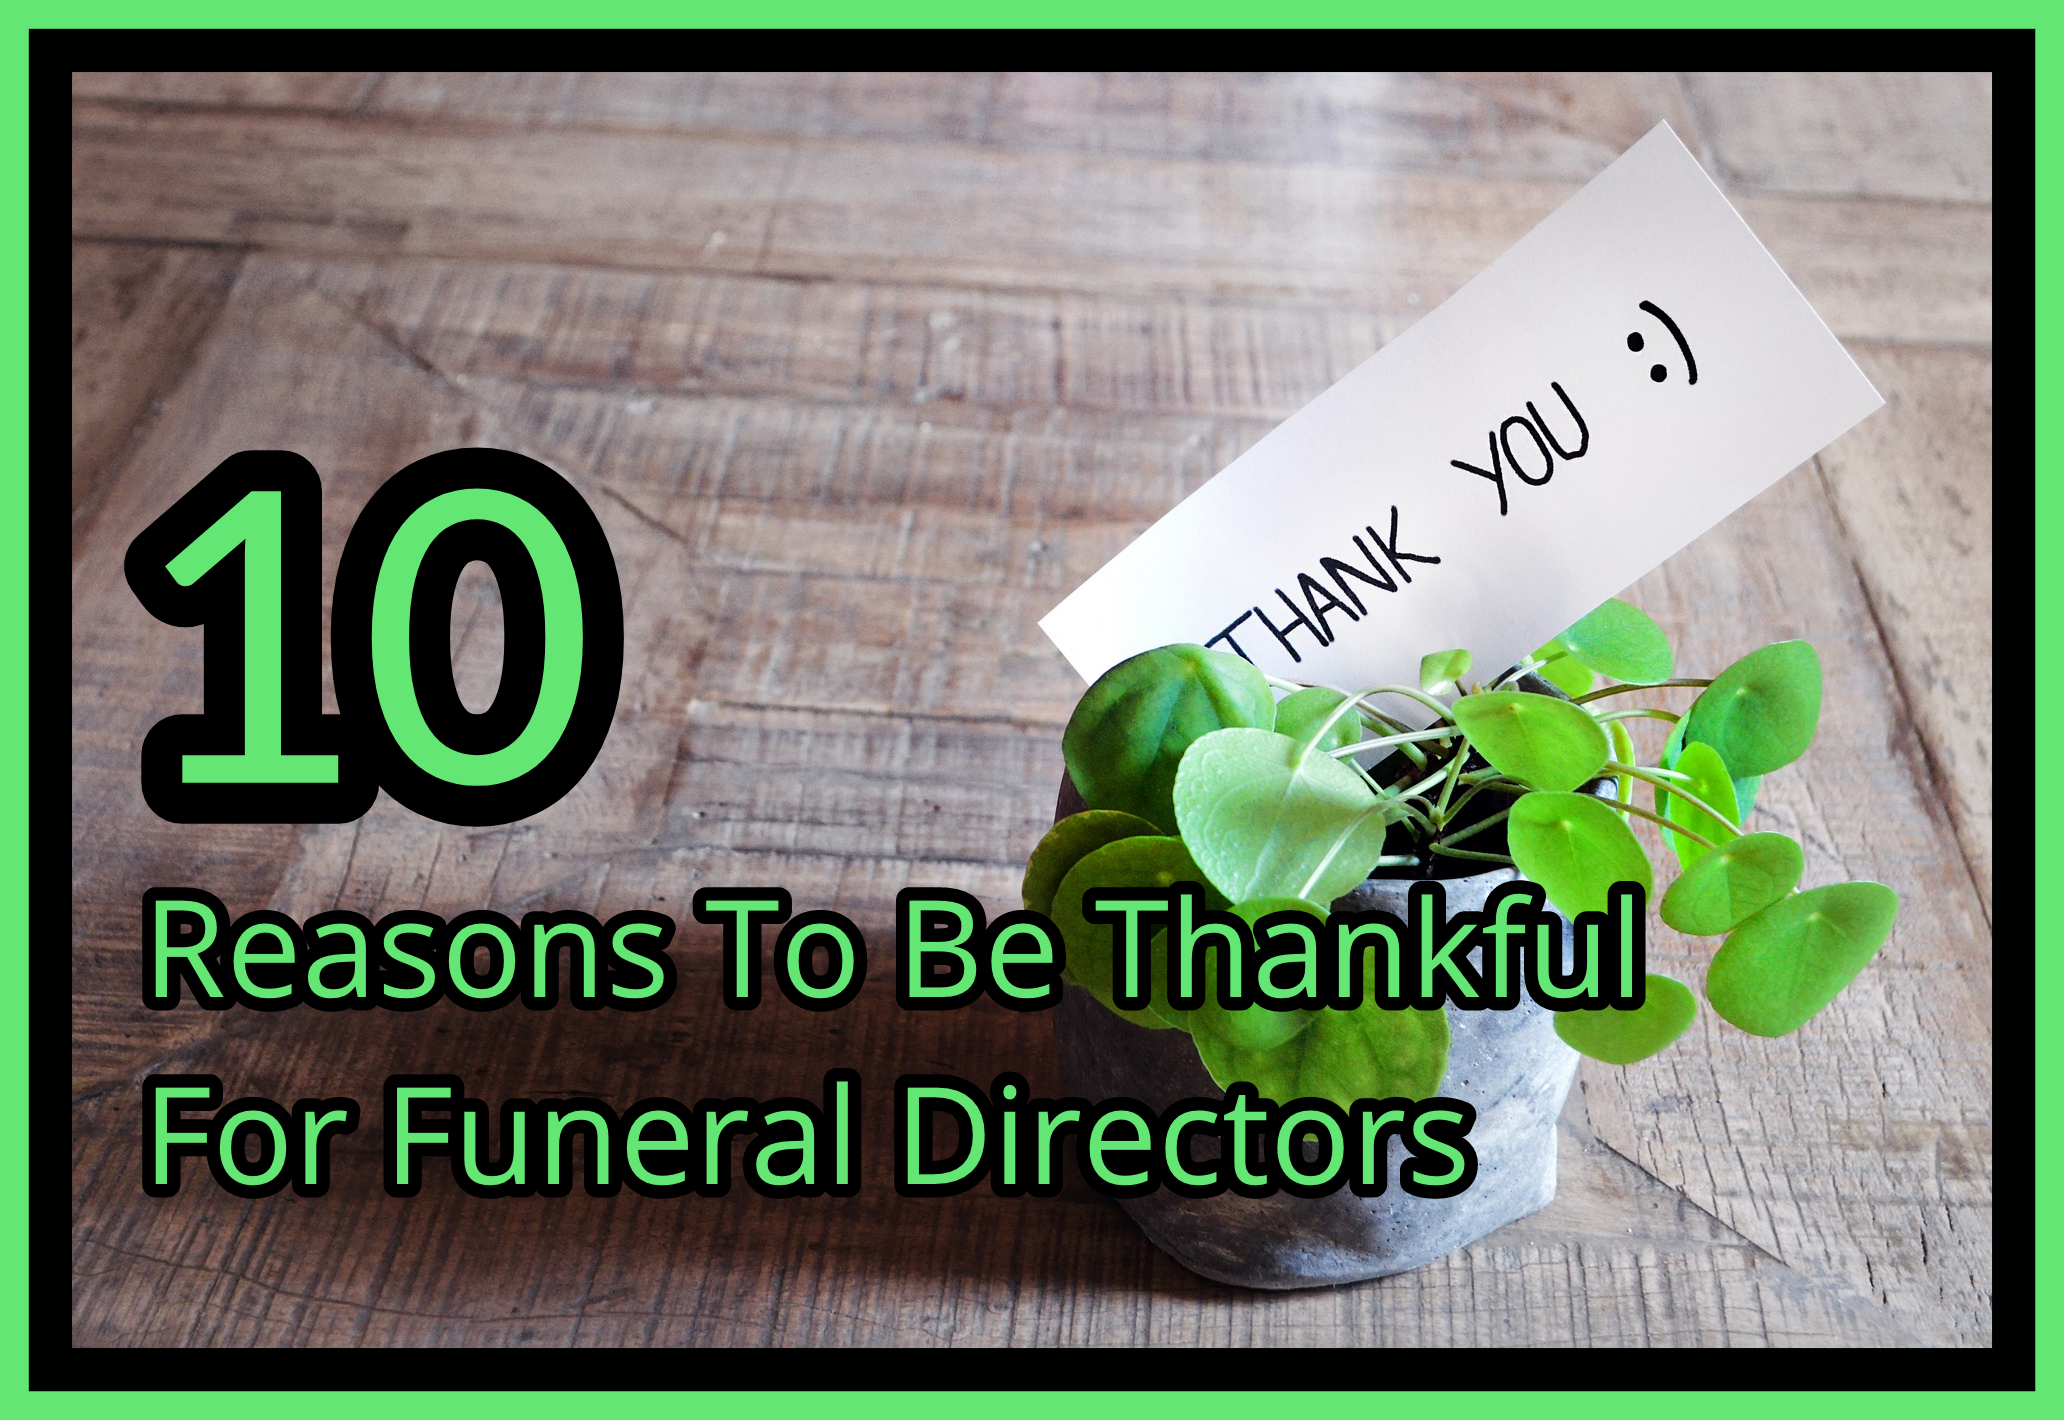 10 Reasons To Be Thankful For Funeral Directors